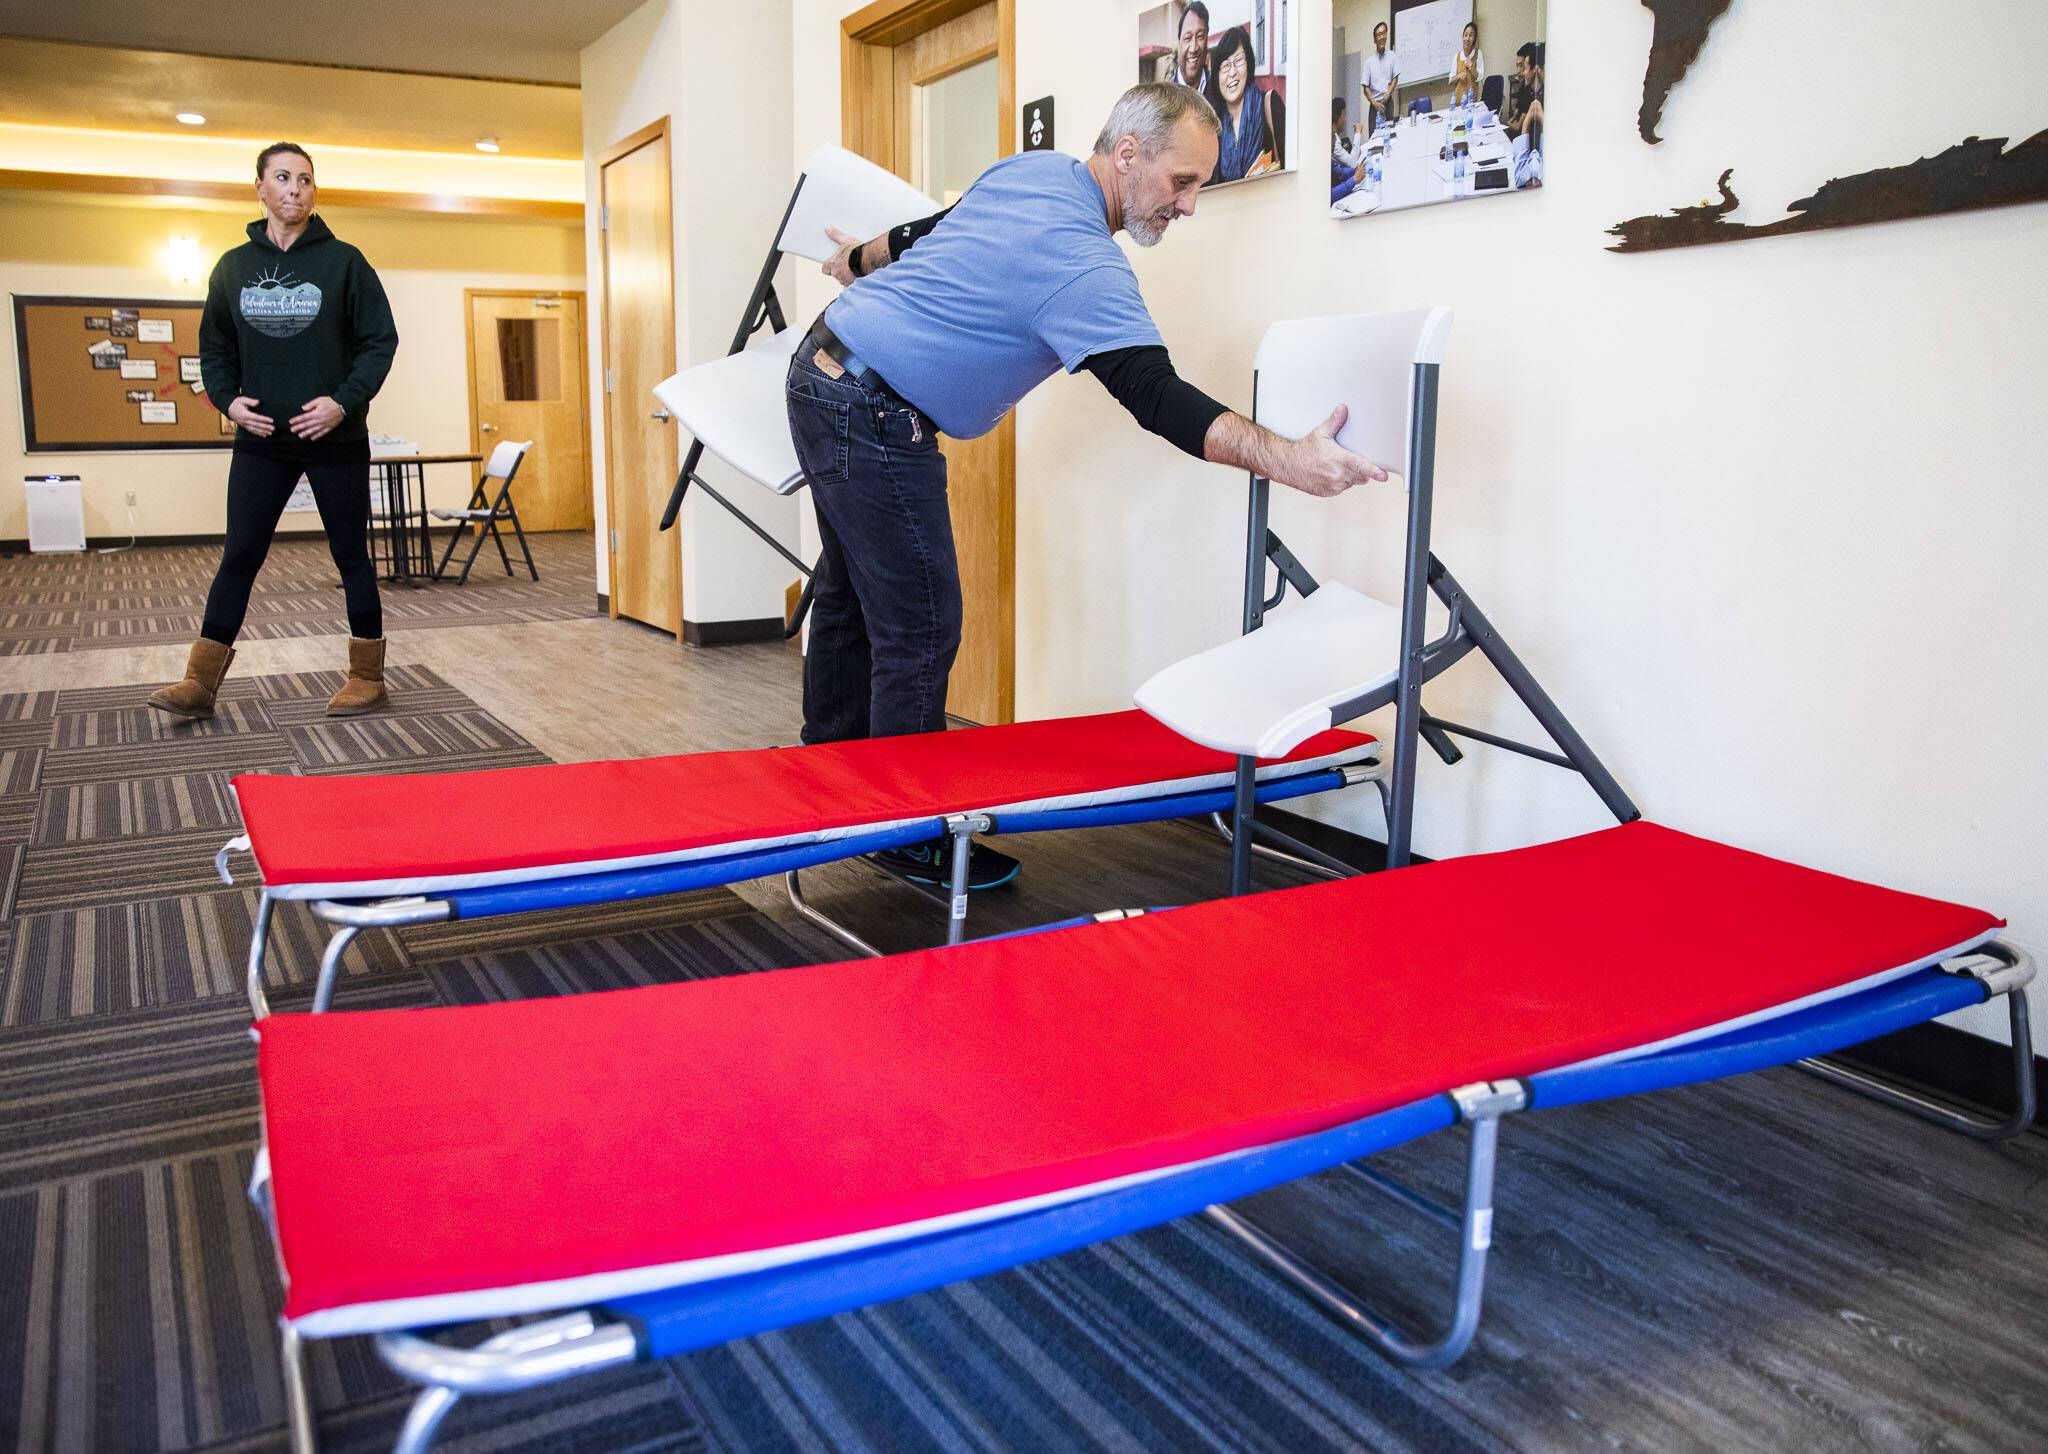 Roger Evans, New Hope Fellowship Church shelter coordinator, sets up two cots as examples of what is available to those that seek shelter at the church on Tuesday, in Monroe. (Olivia Vanni / The Herald)